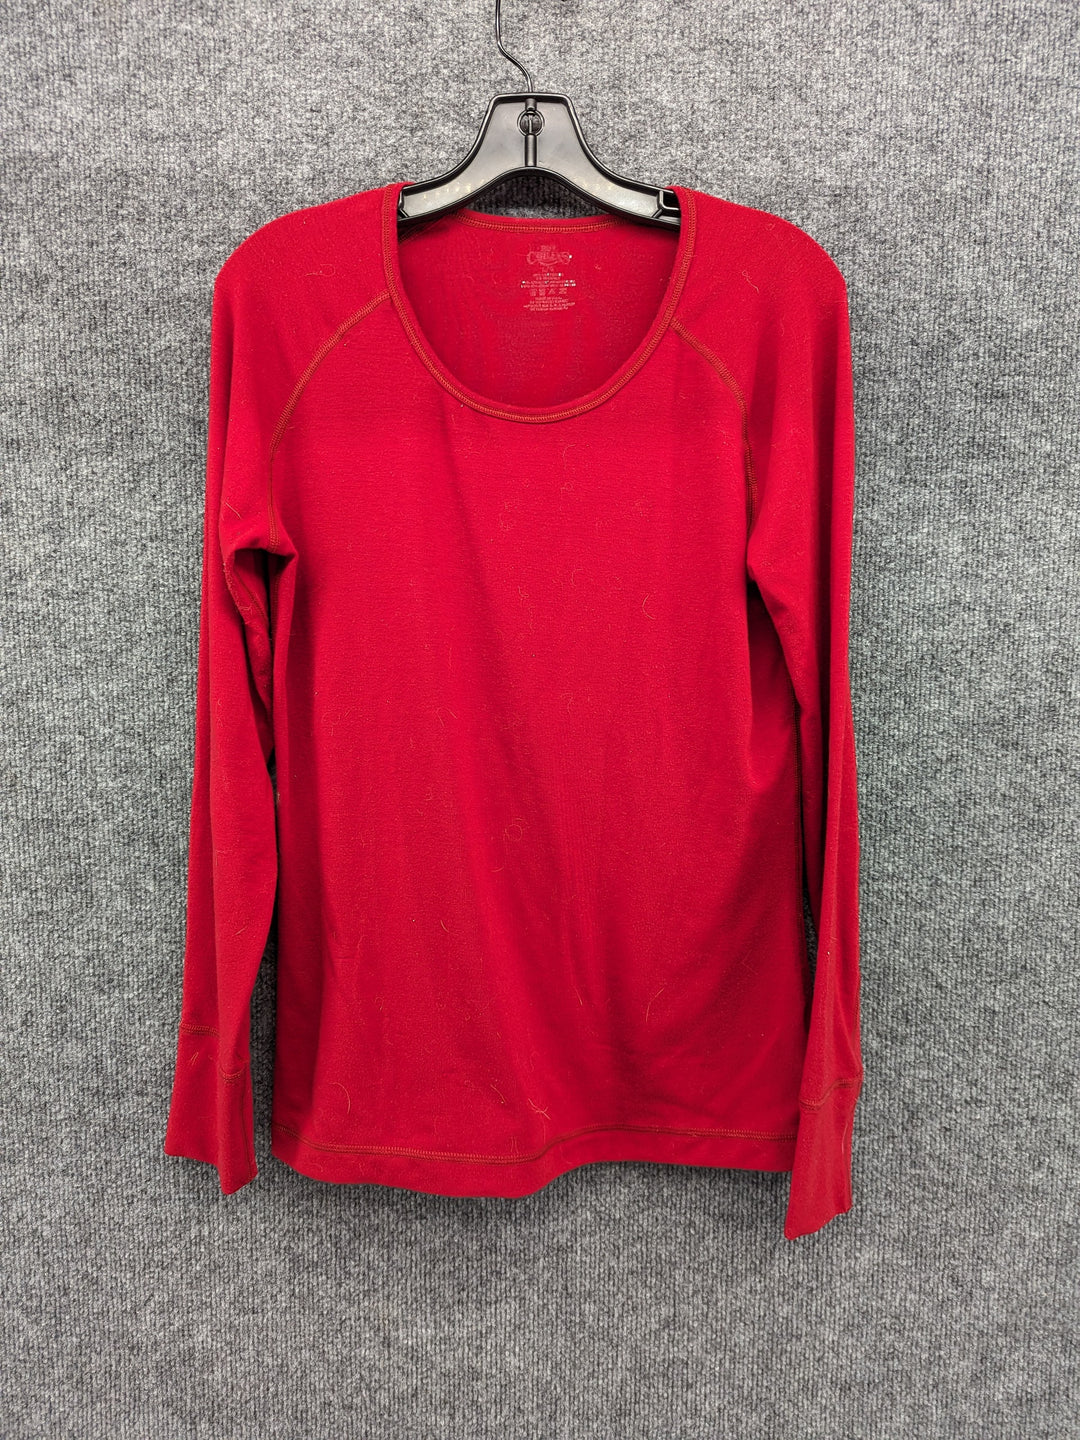 Hot Chillys Size W Large Women's Base Layer Top